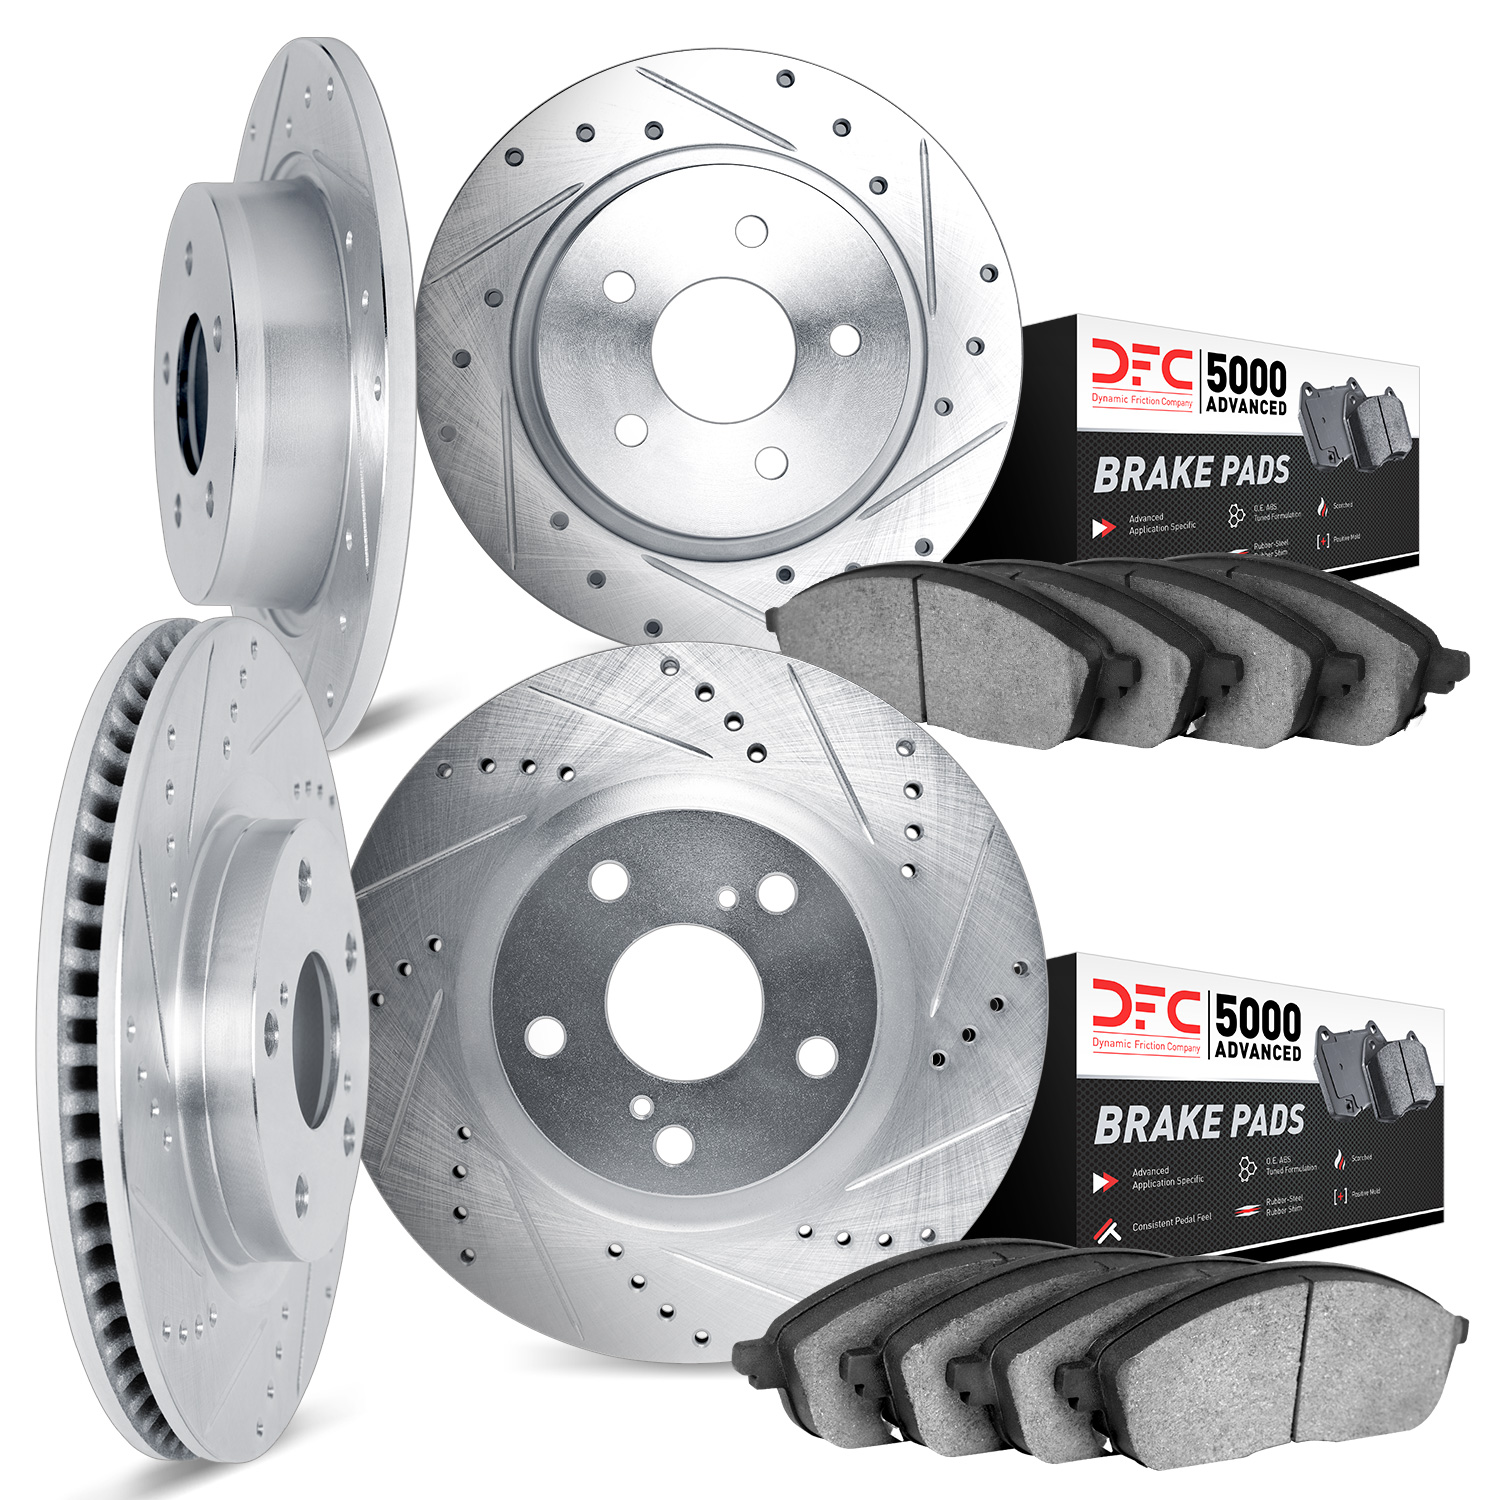 7504-11007 Drilled/Slotted Brake Rotors w/5000 Advanced Brake Pads Kit [Silver], 2003-2005 Land Rover, Position: Front and Rear